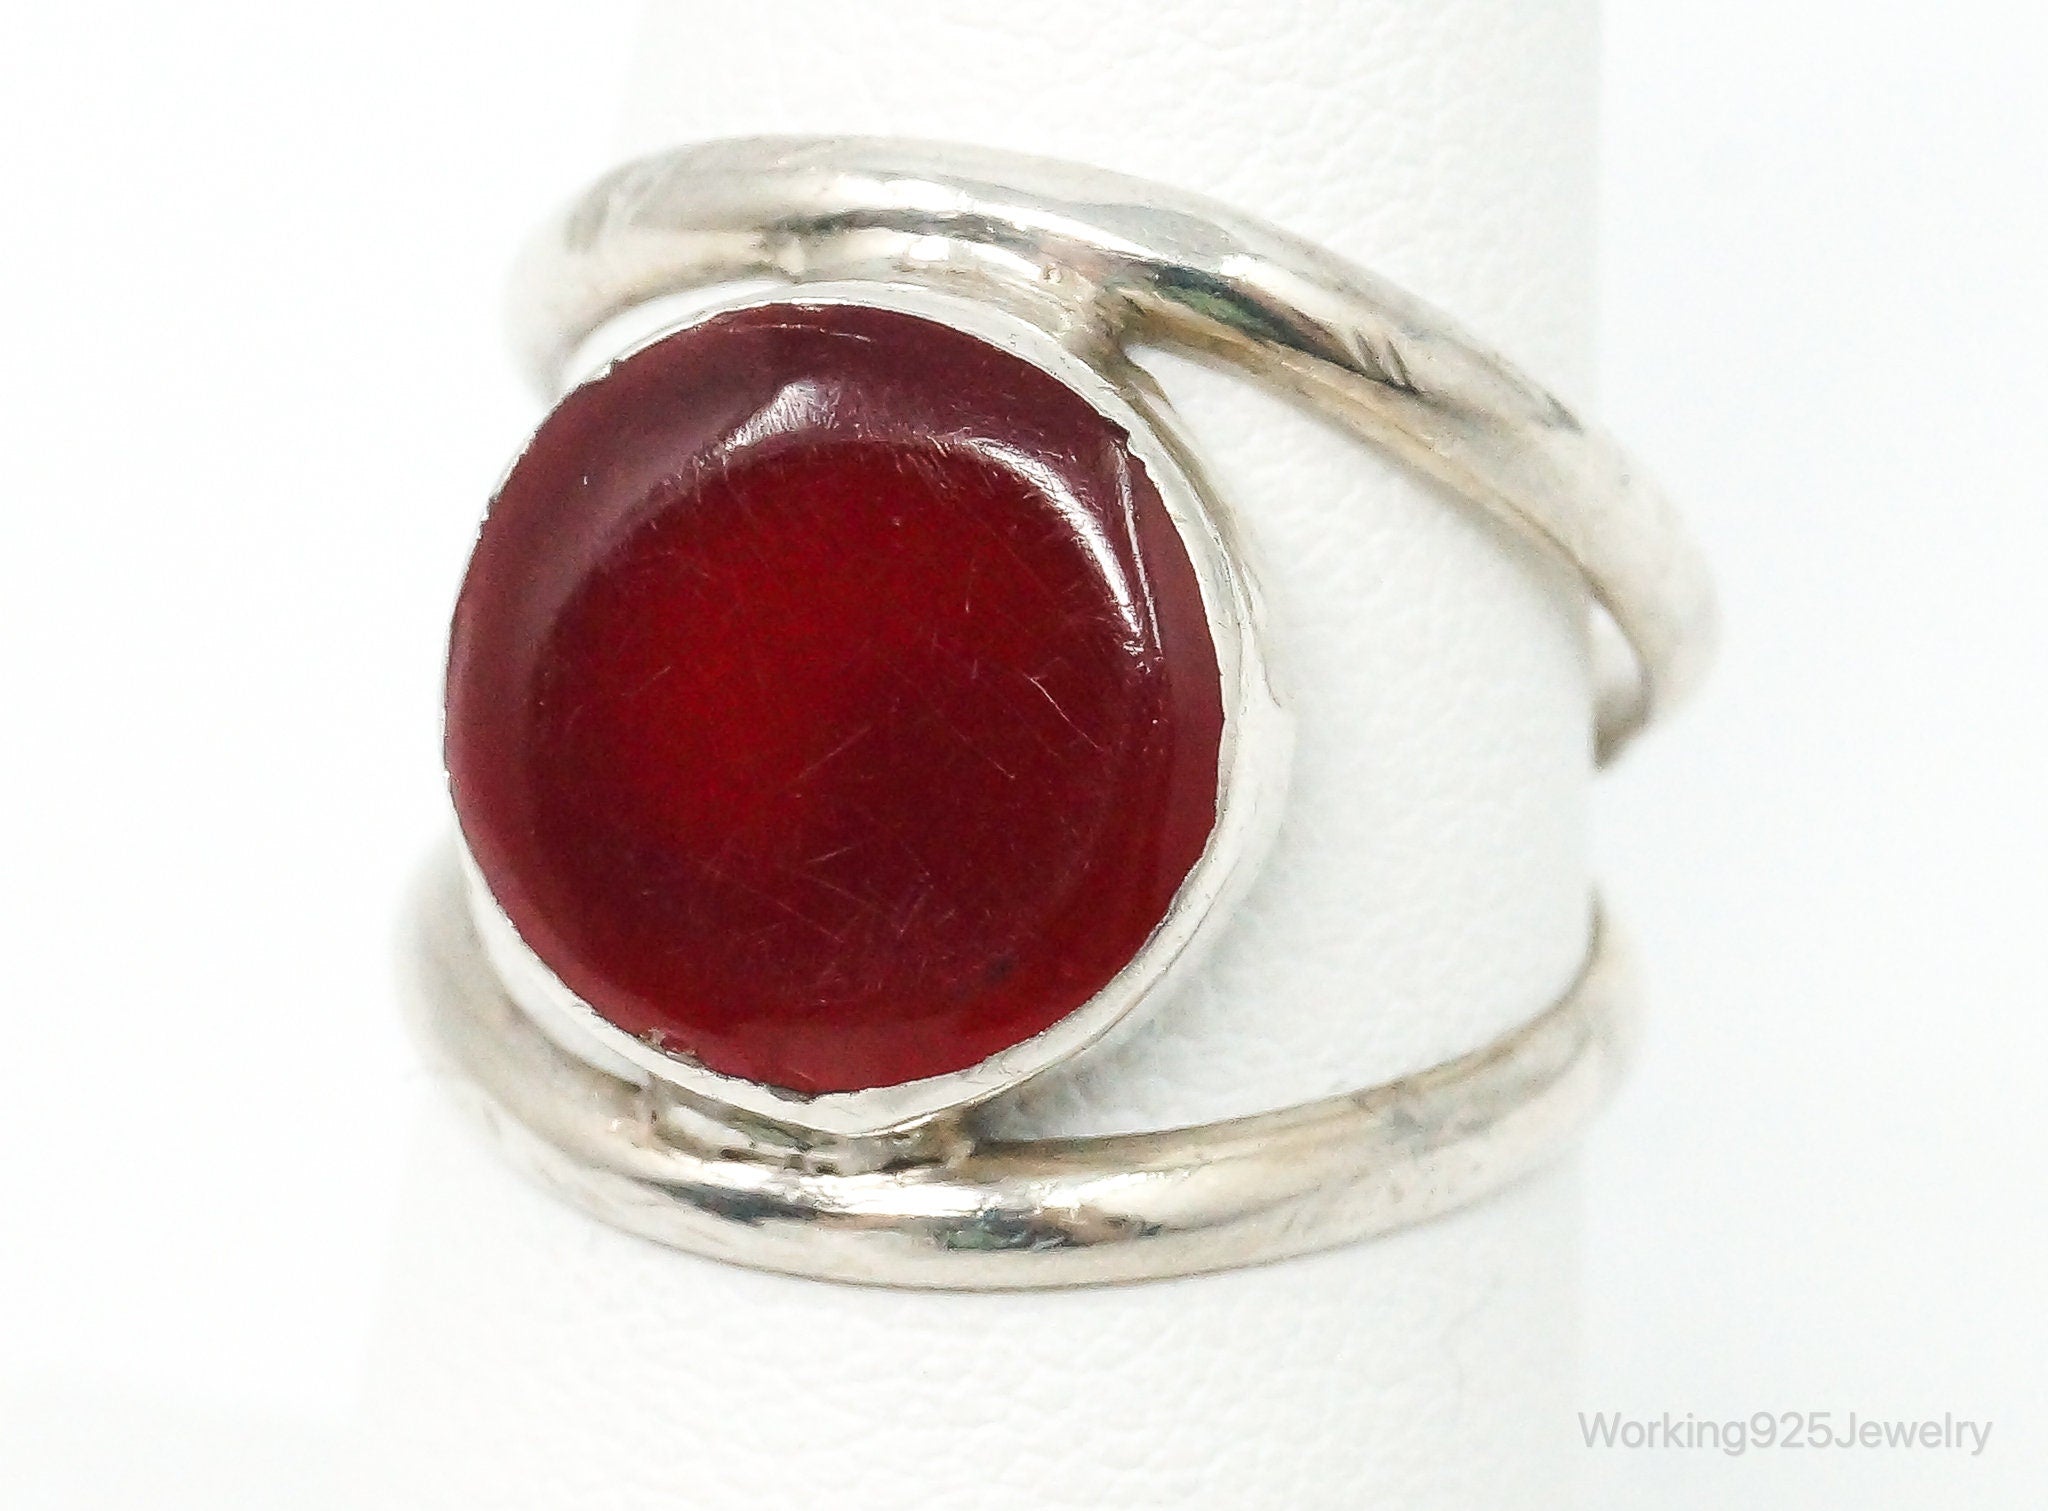 Vintage Mexico Carnelian Sterling Silver Ring - Size 6.75